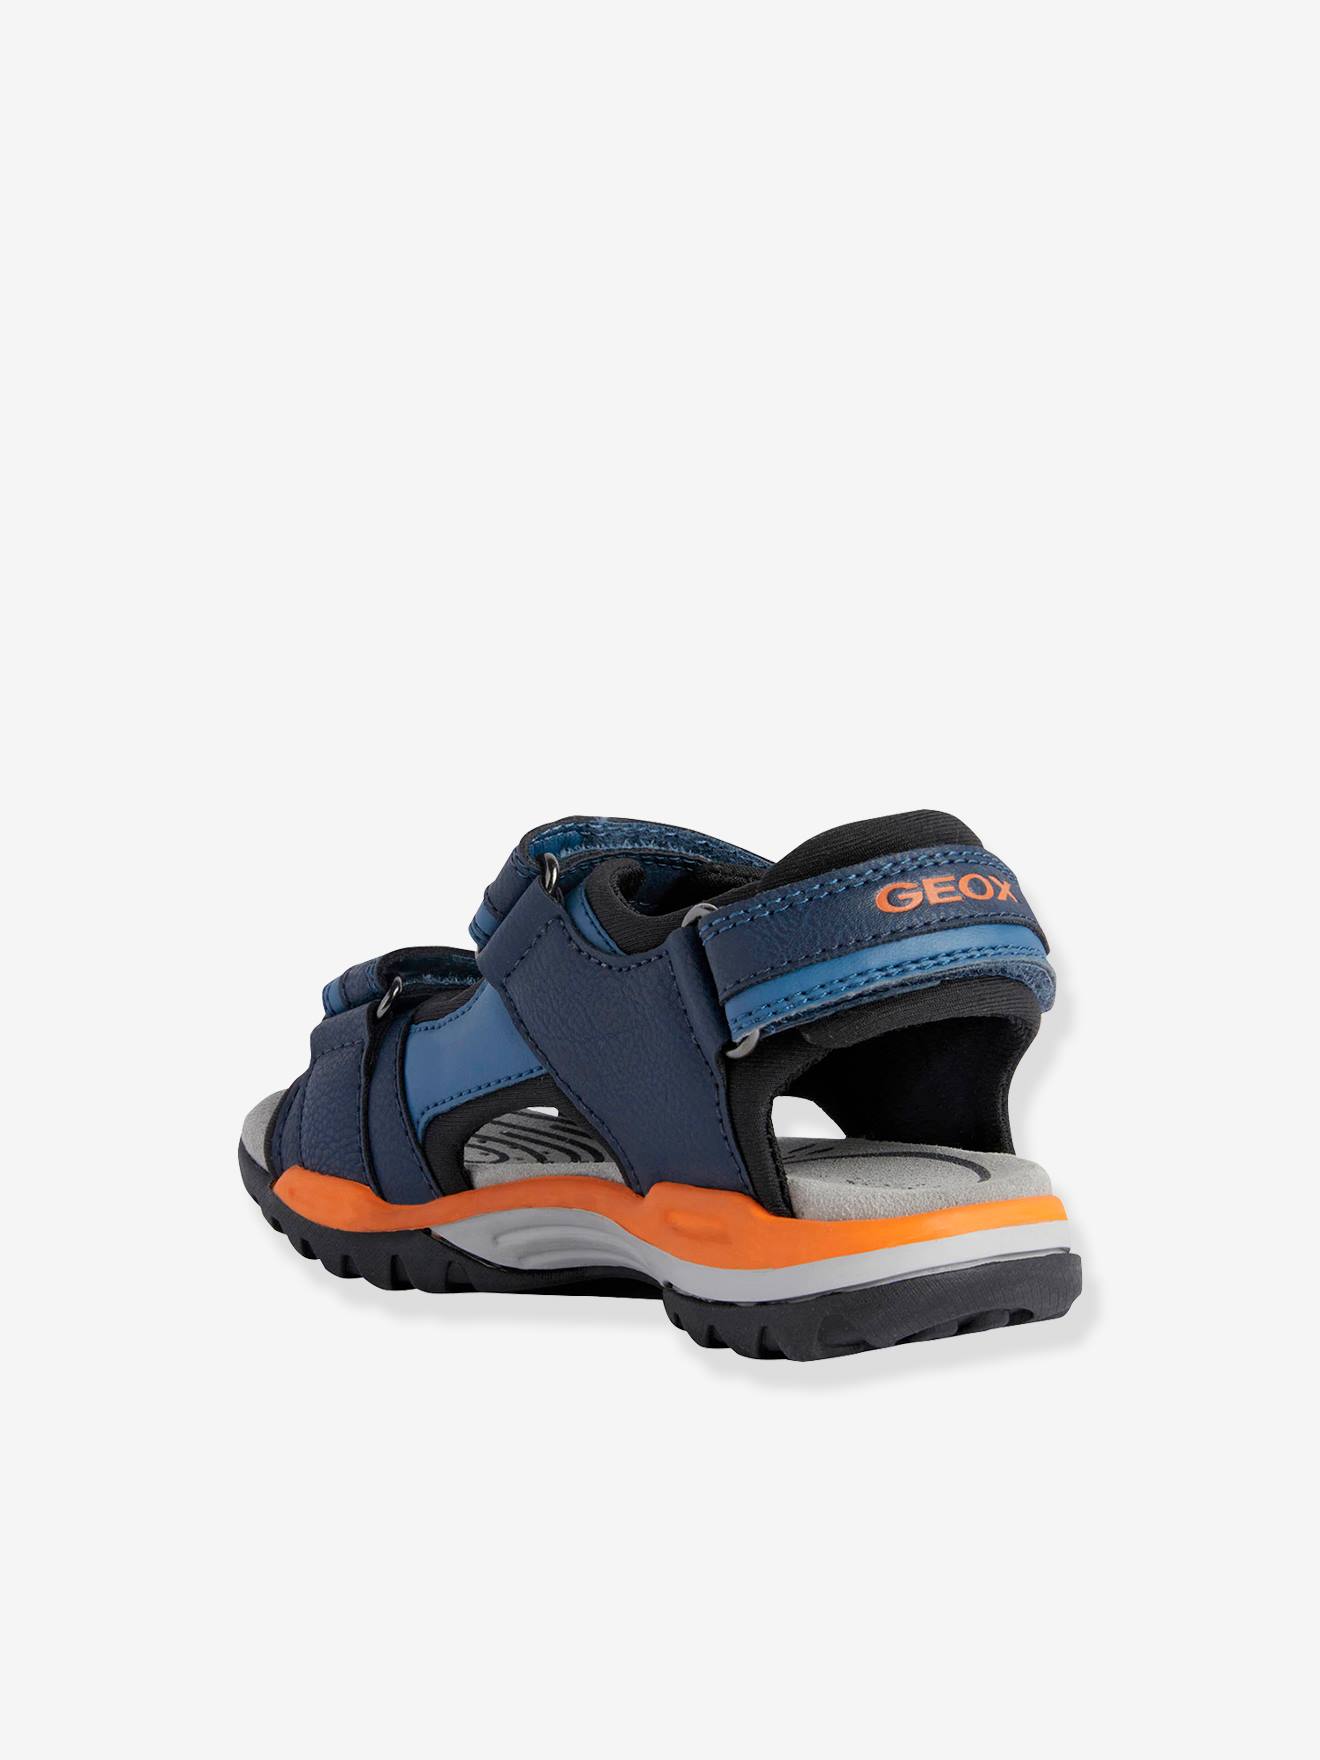 Sandals for Boys, solid, J. Borealis by medium GEOX® blue B.A - Shoes